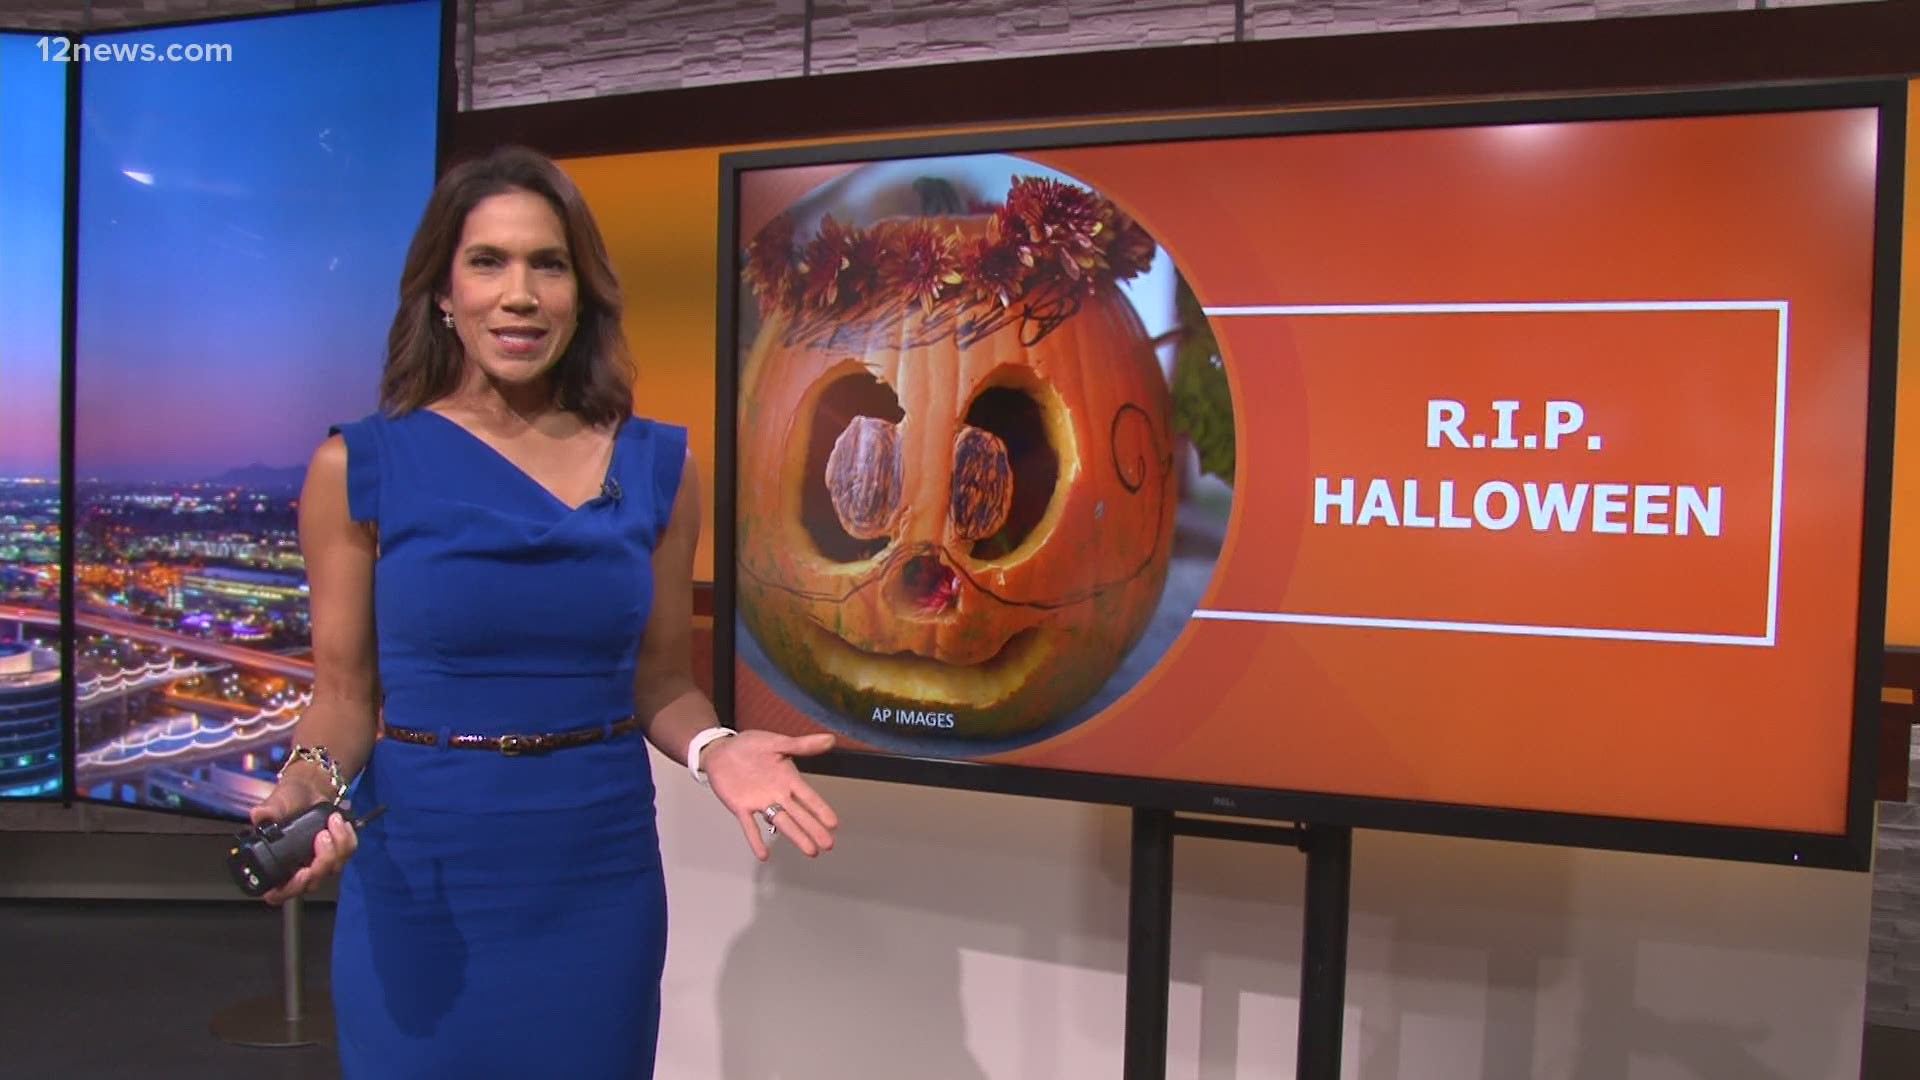 What will Halloween look like at your house this year? We asked and Team 12's Rachel McNeill is reading your answers.